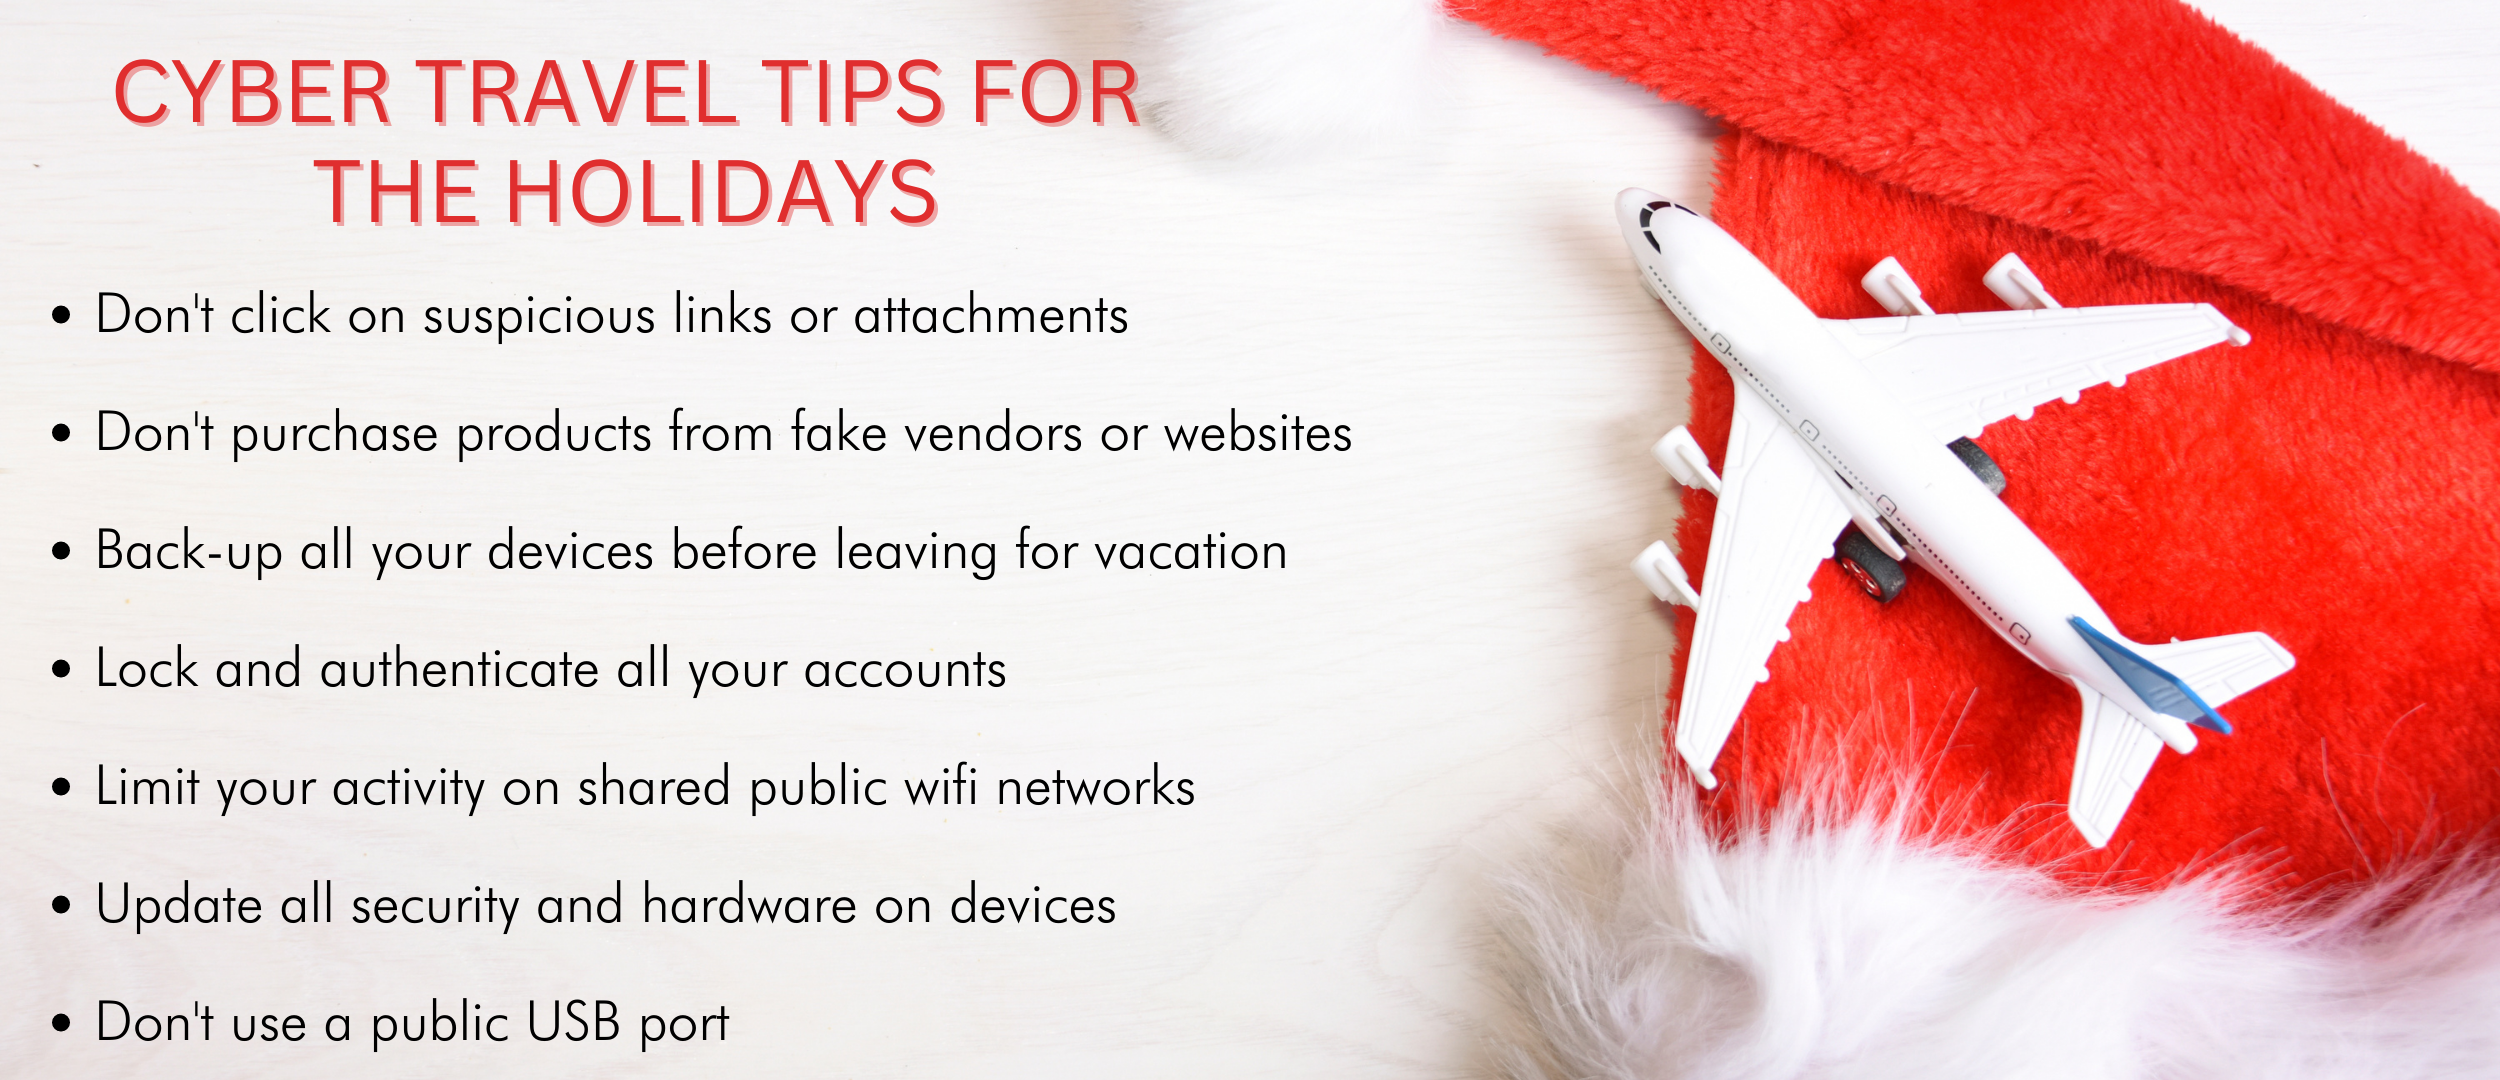 CYBER TRAVEL TIPS FOR THE HOLIDAYS